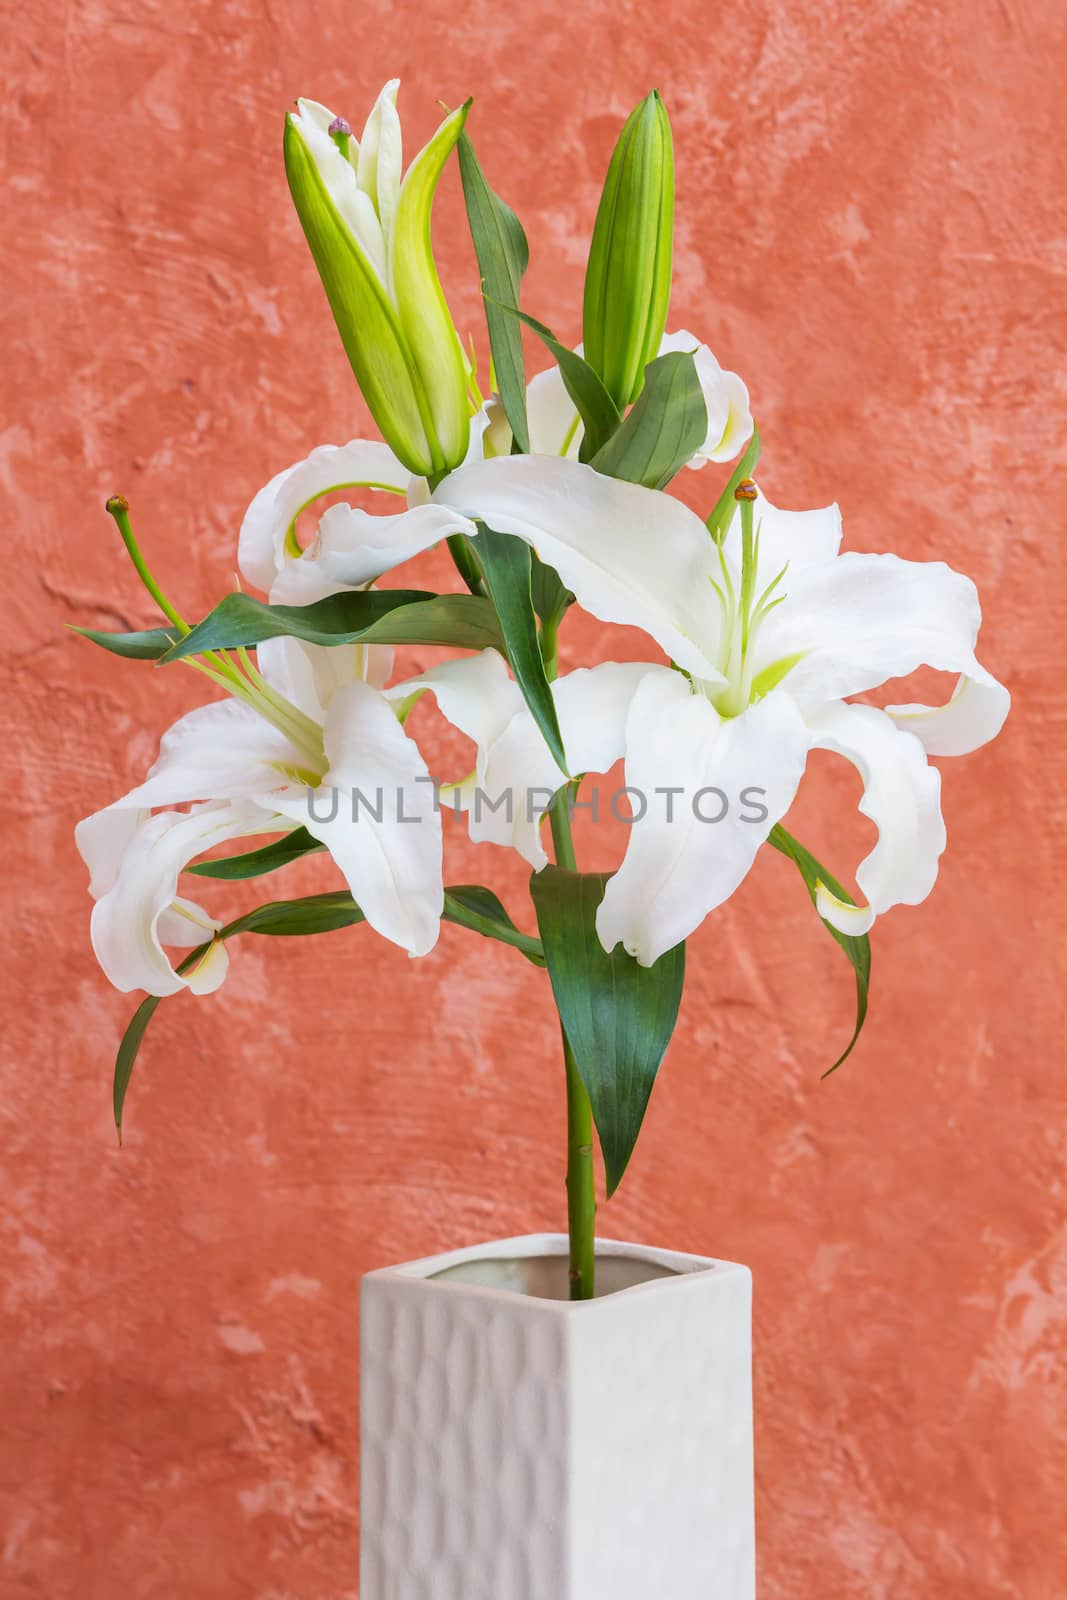 White lily in vase isolated on grunge background